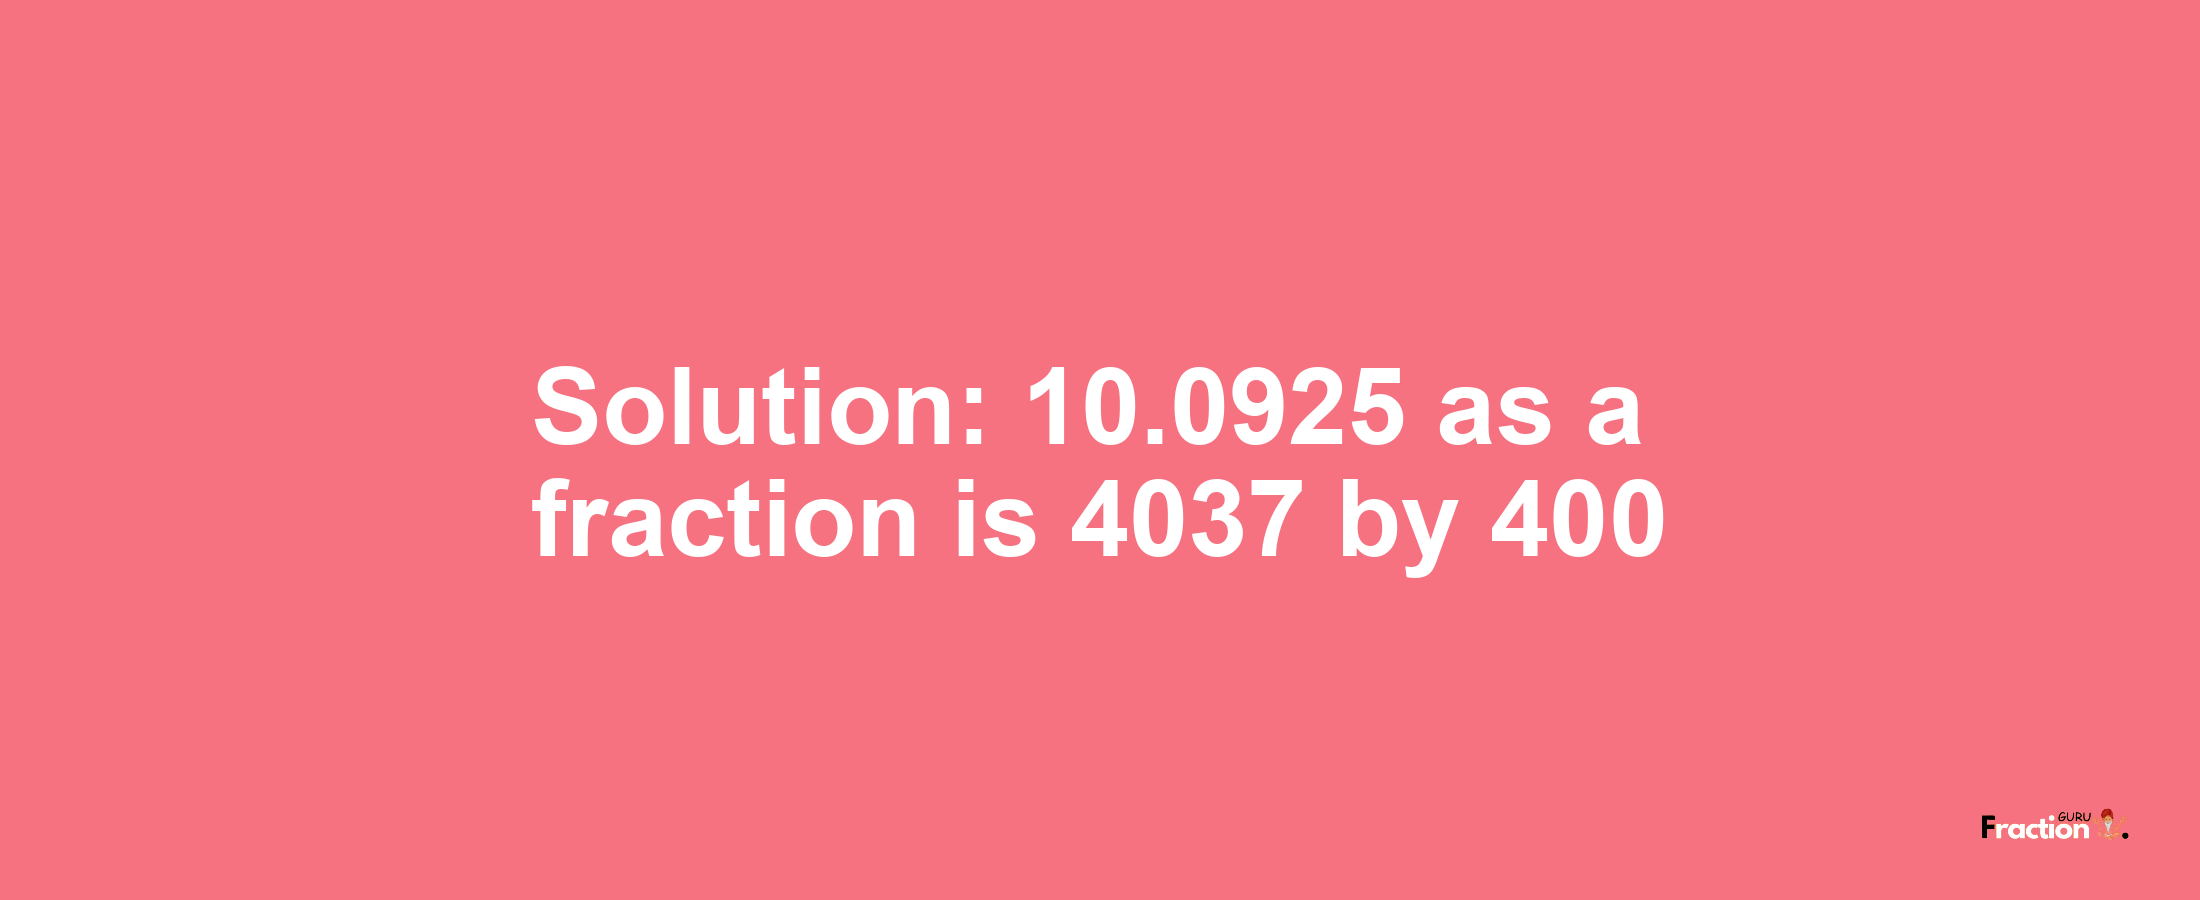 Solution:10.0925 as a fraction is 4037/400